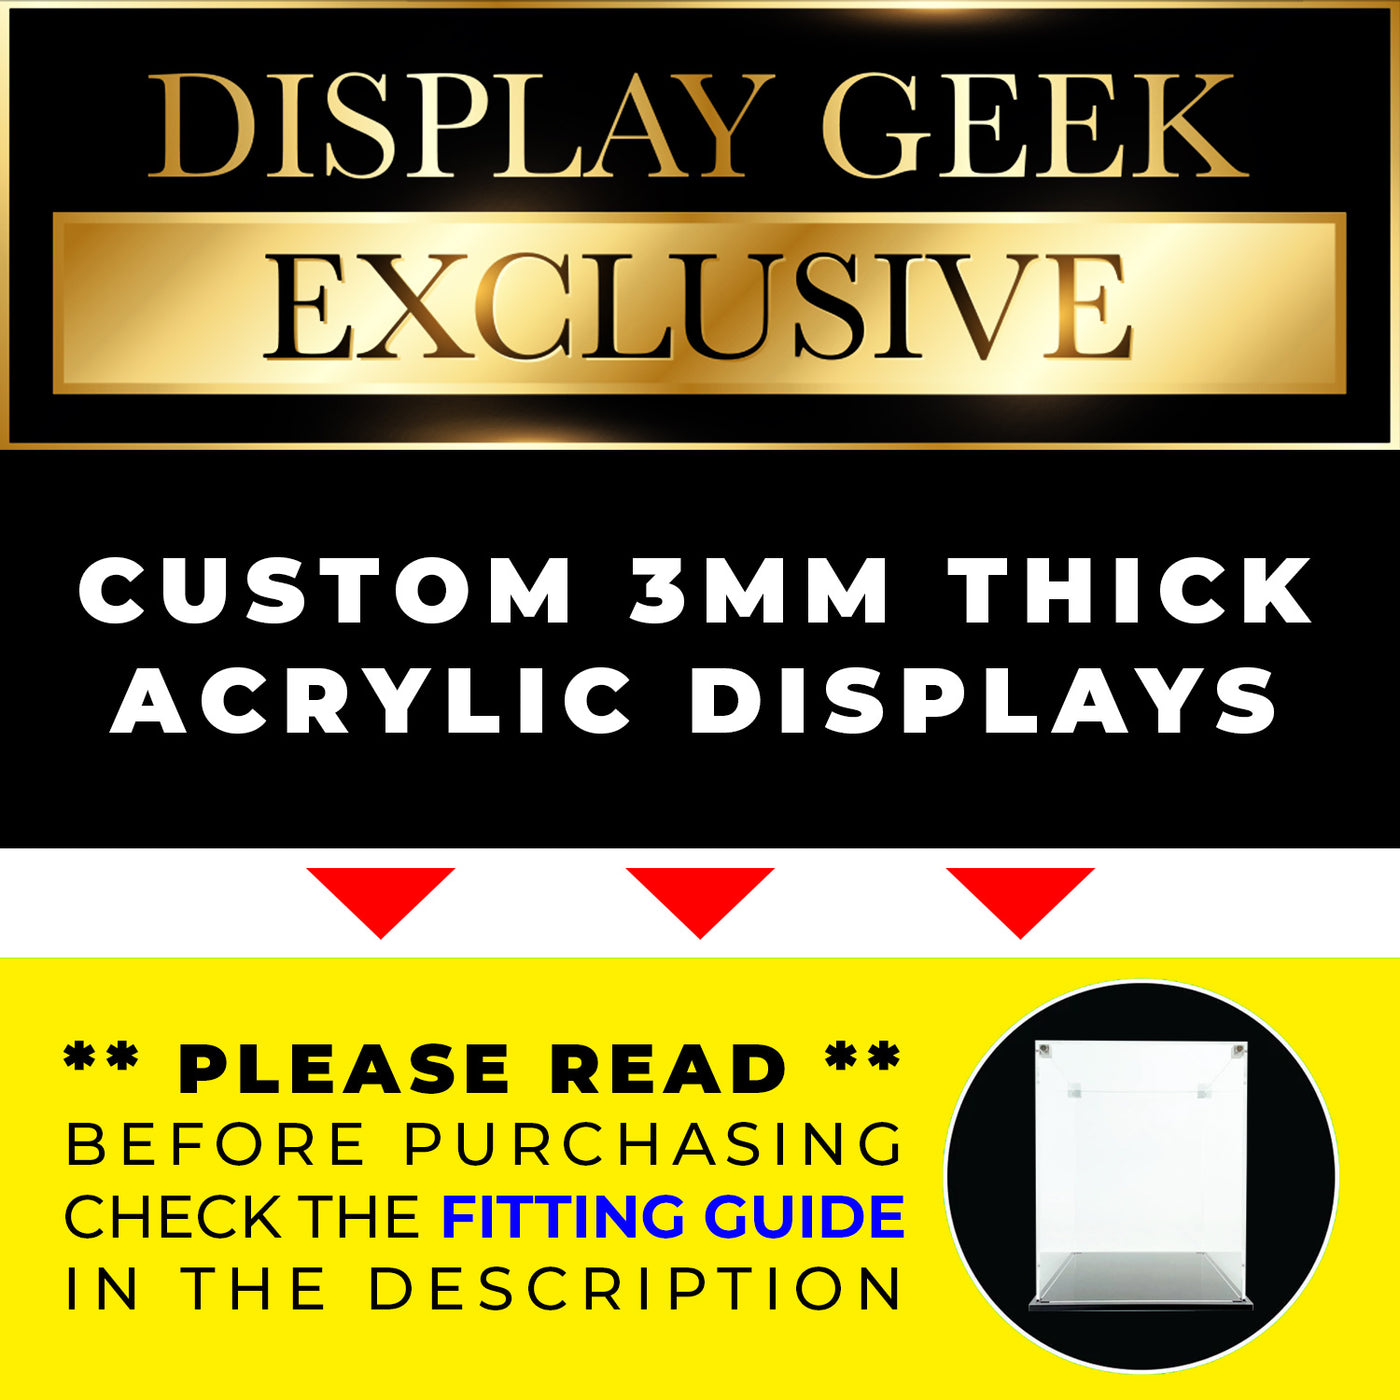 12.875h x 12w x 8.25d Funko Pop 10 inch Wide Custom Acrylic Display Case for Funko Pop Grails on The Protector Guide App by Display Geek